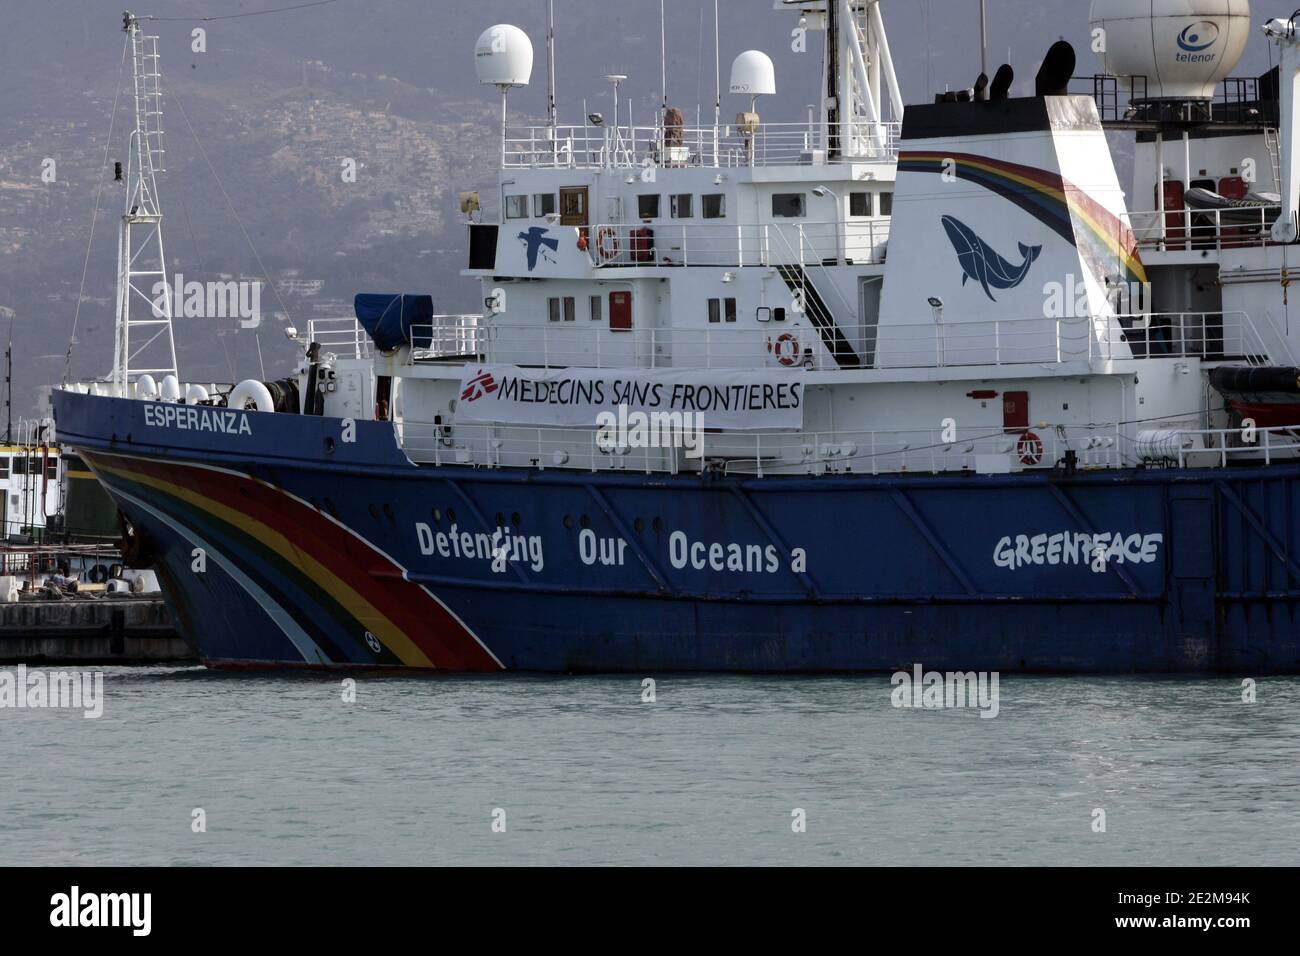 French NGO 'Doctors Without Borders' ship 'Esperanza' is moored at Port-au-Prince harbor, Haiti on January 24, 2010. Photo by Sebastien Dufour/ABACAPRESS.COM Stock Photo